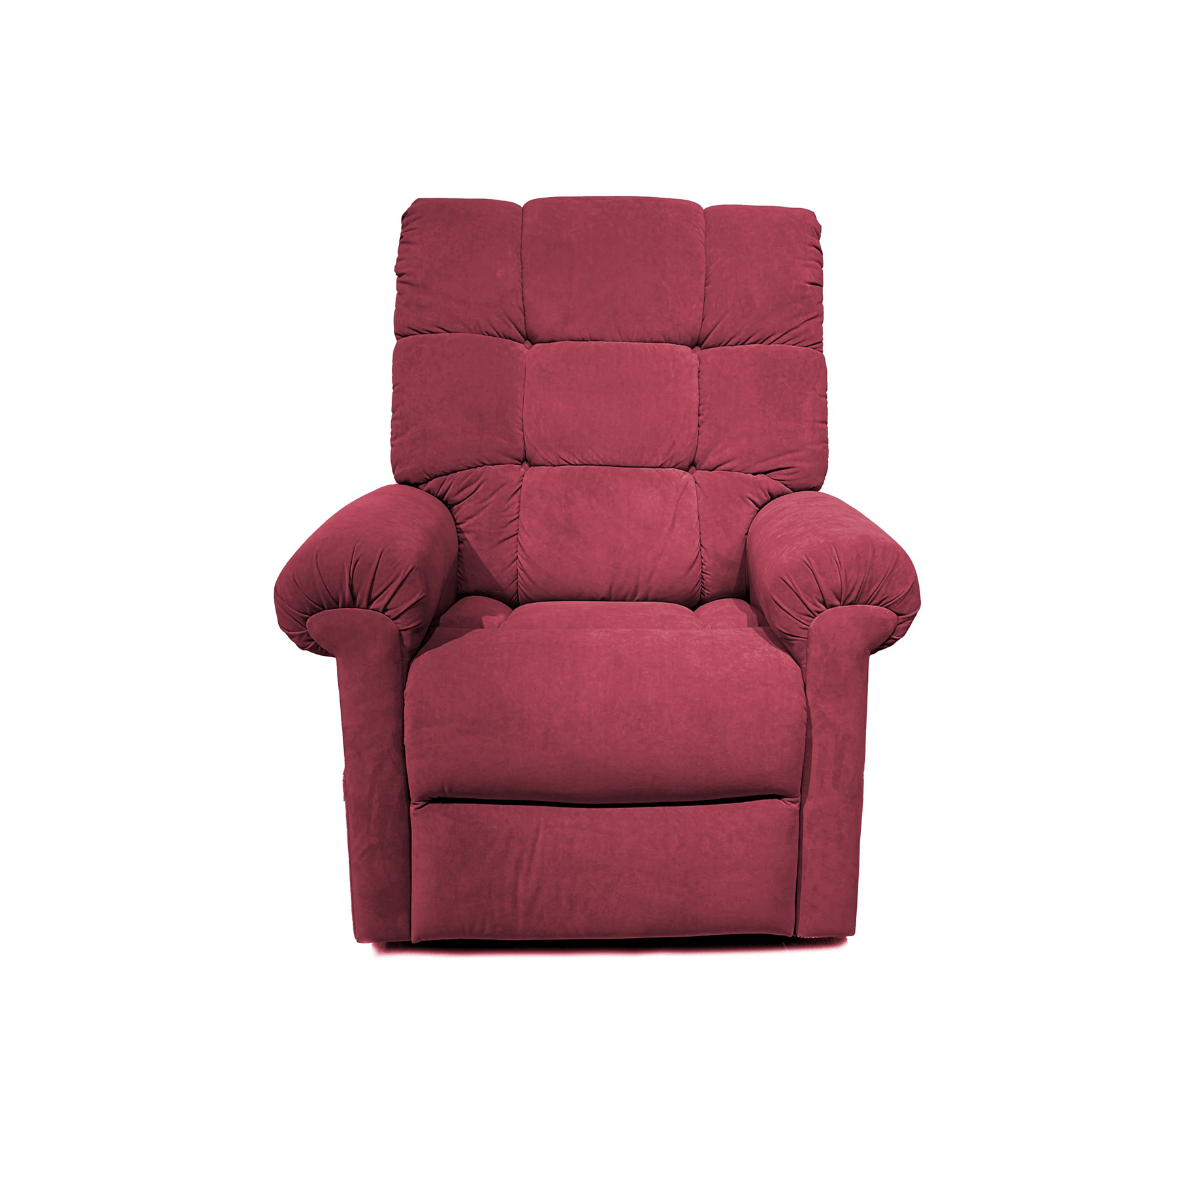 Burgundy Journey Perfect Sleep Chair sitting in upright position facing forward with padded armrests and ample cushioning